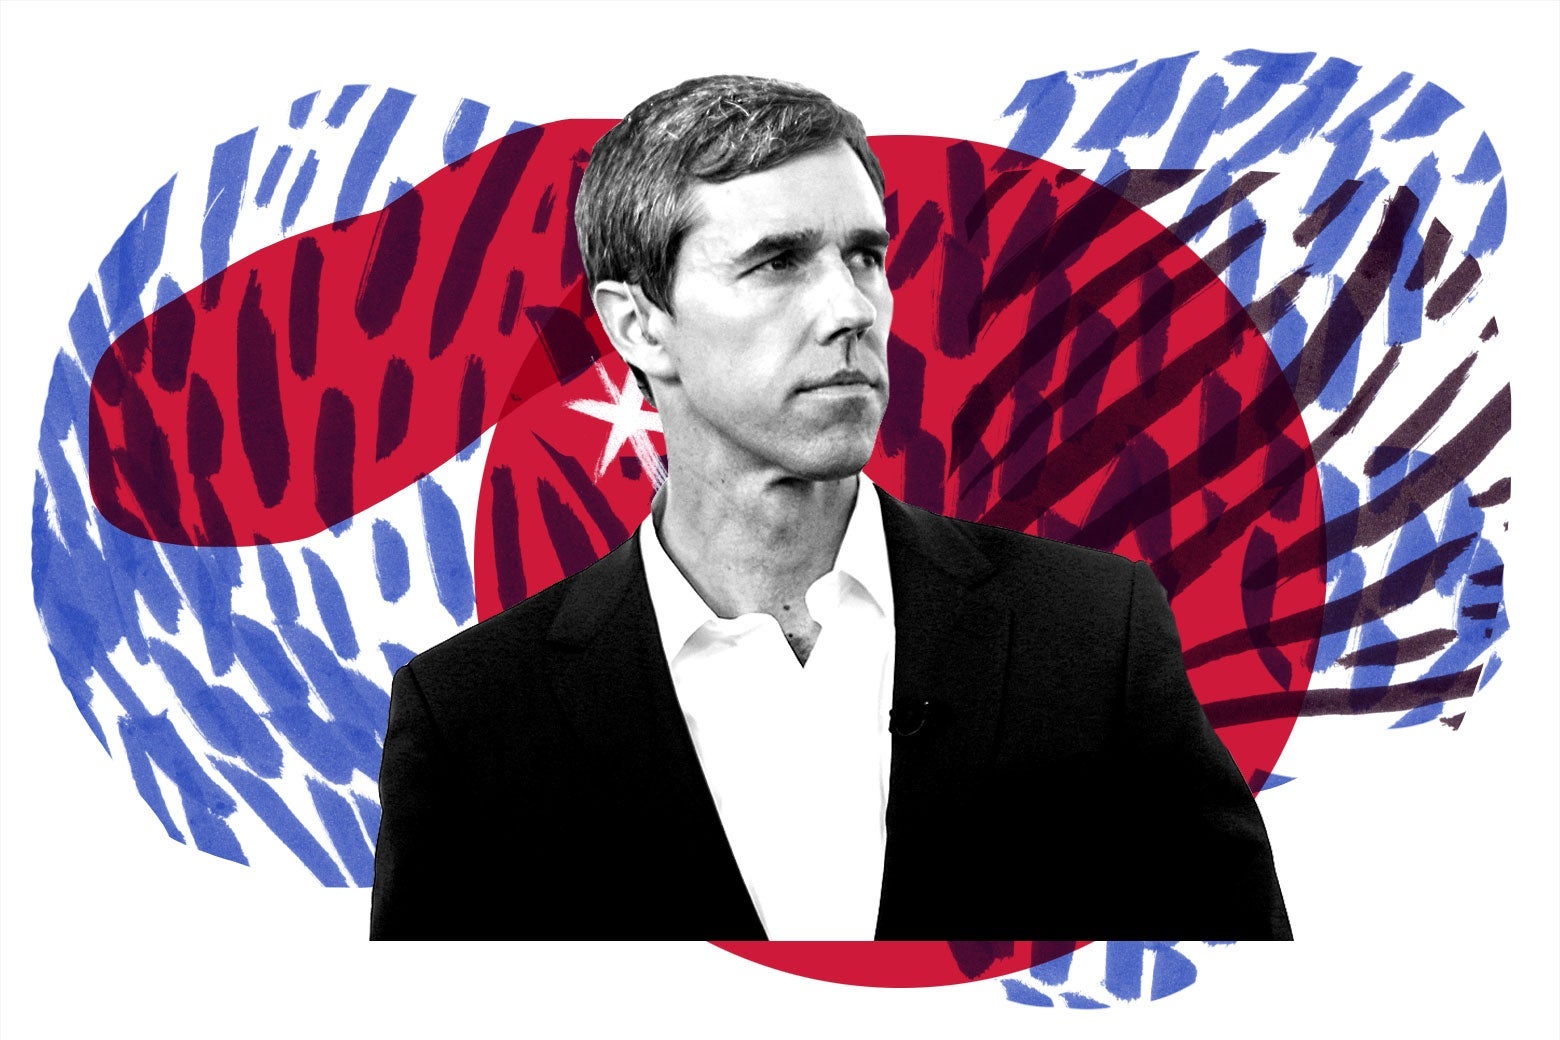 Beto O'Rourke, surrounded by red, white, and blue, insurgent